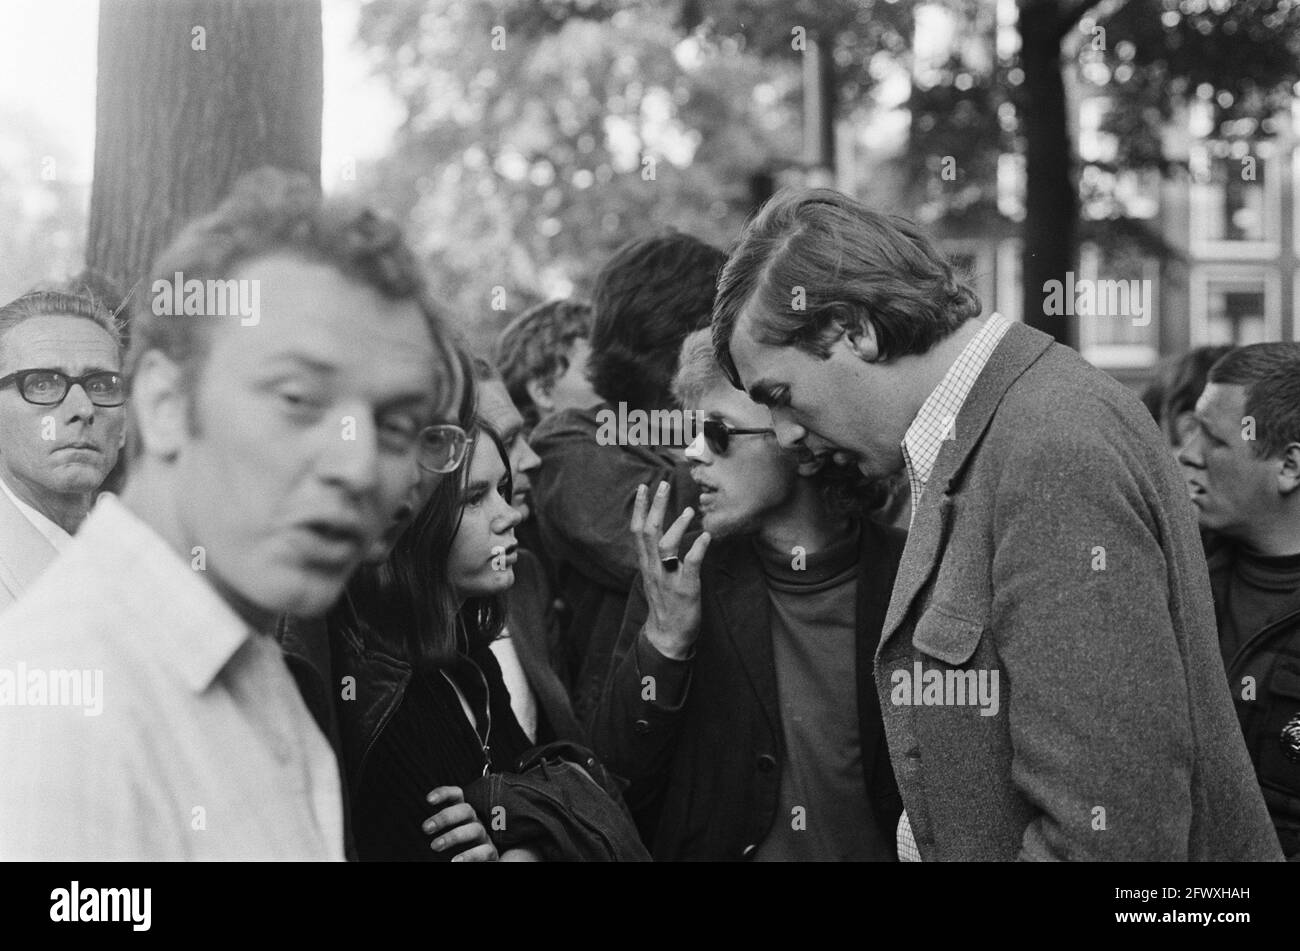 Protest demonstration students and workers lawsuits against Maagdenhuis occupiers from the Westermarkt Amsterdam, June 12, 1969, The Netherlands, 20th Stock Photo